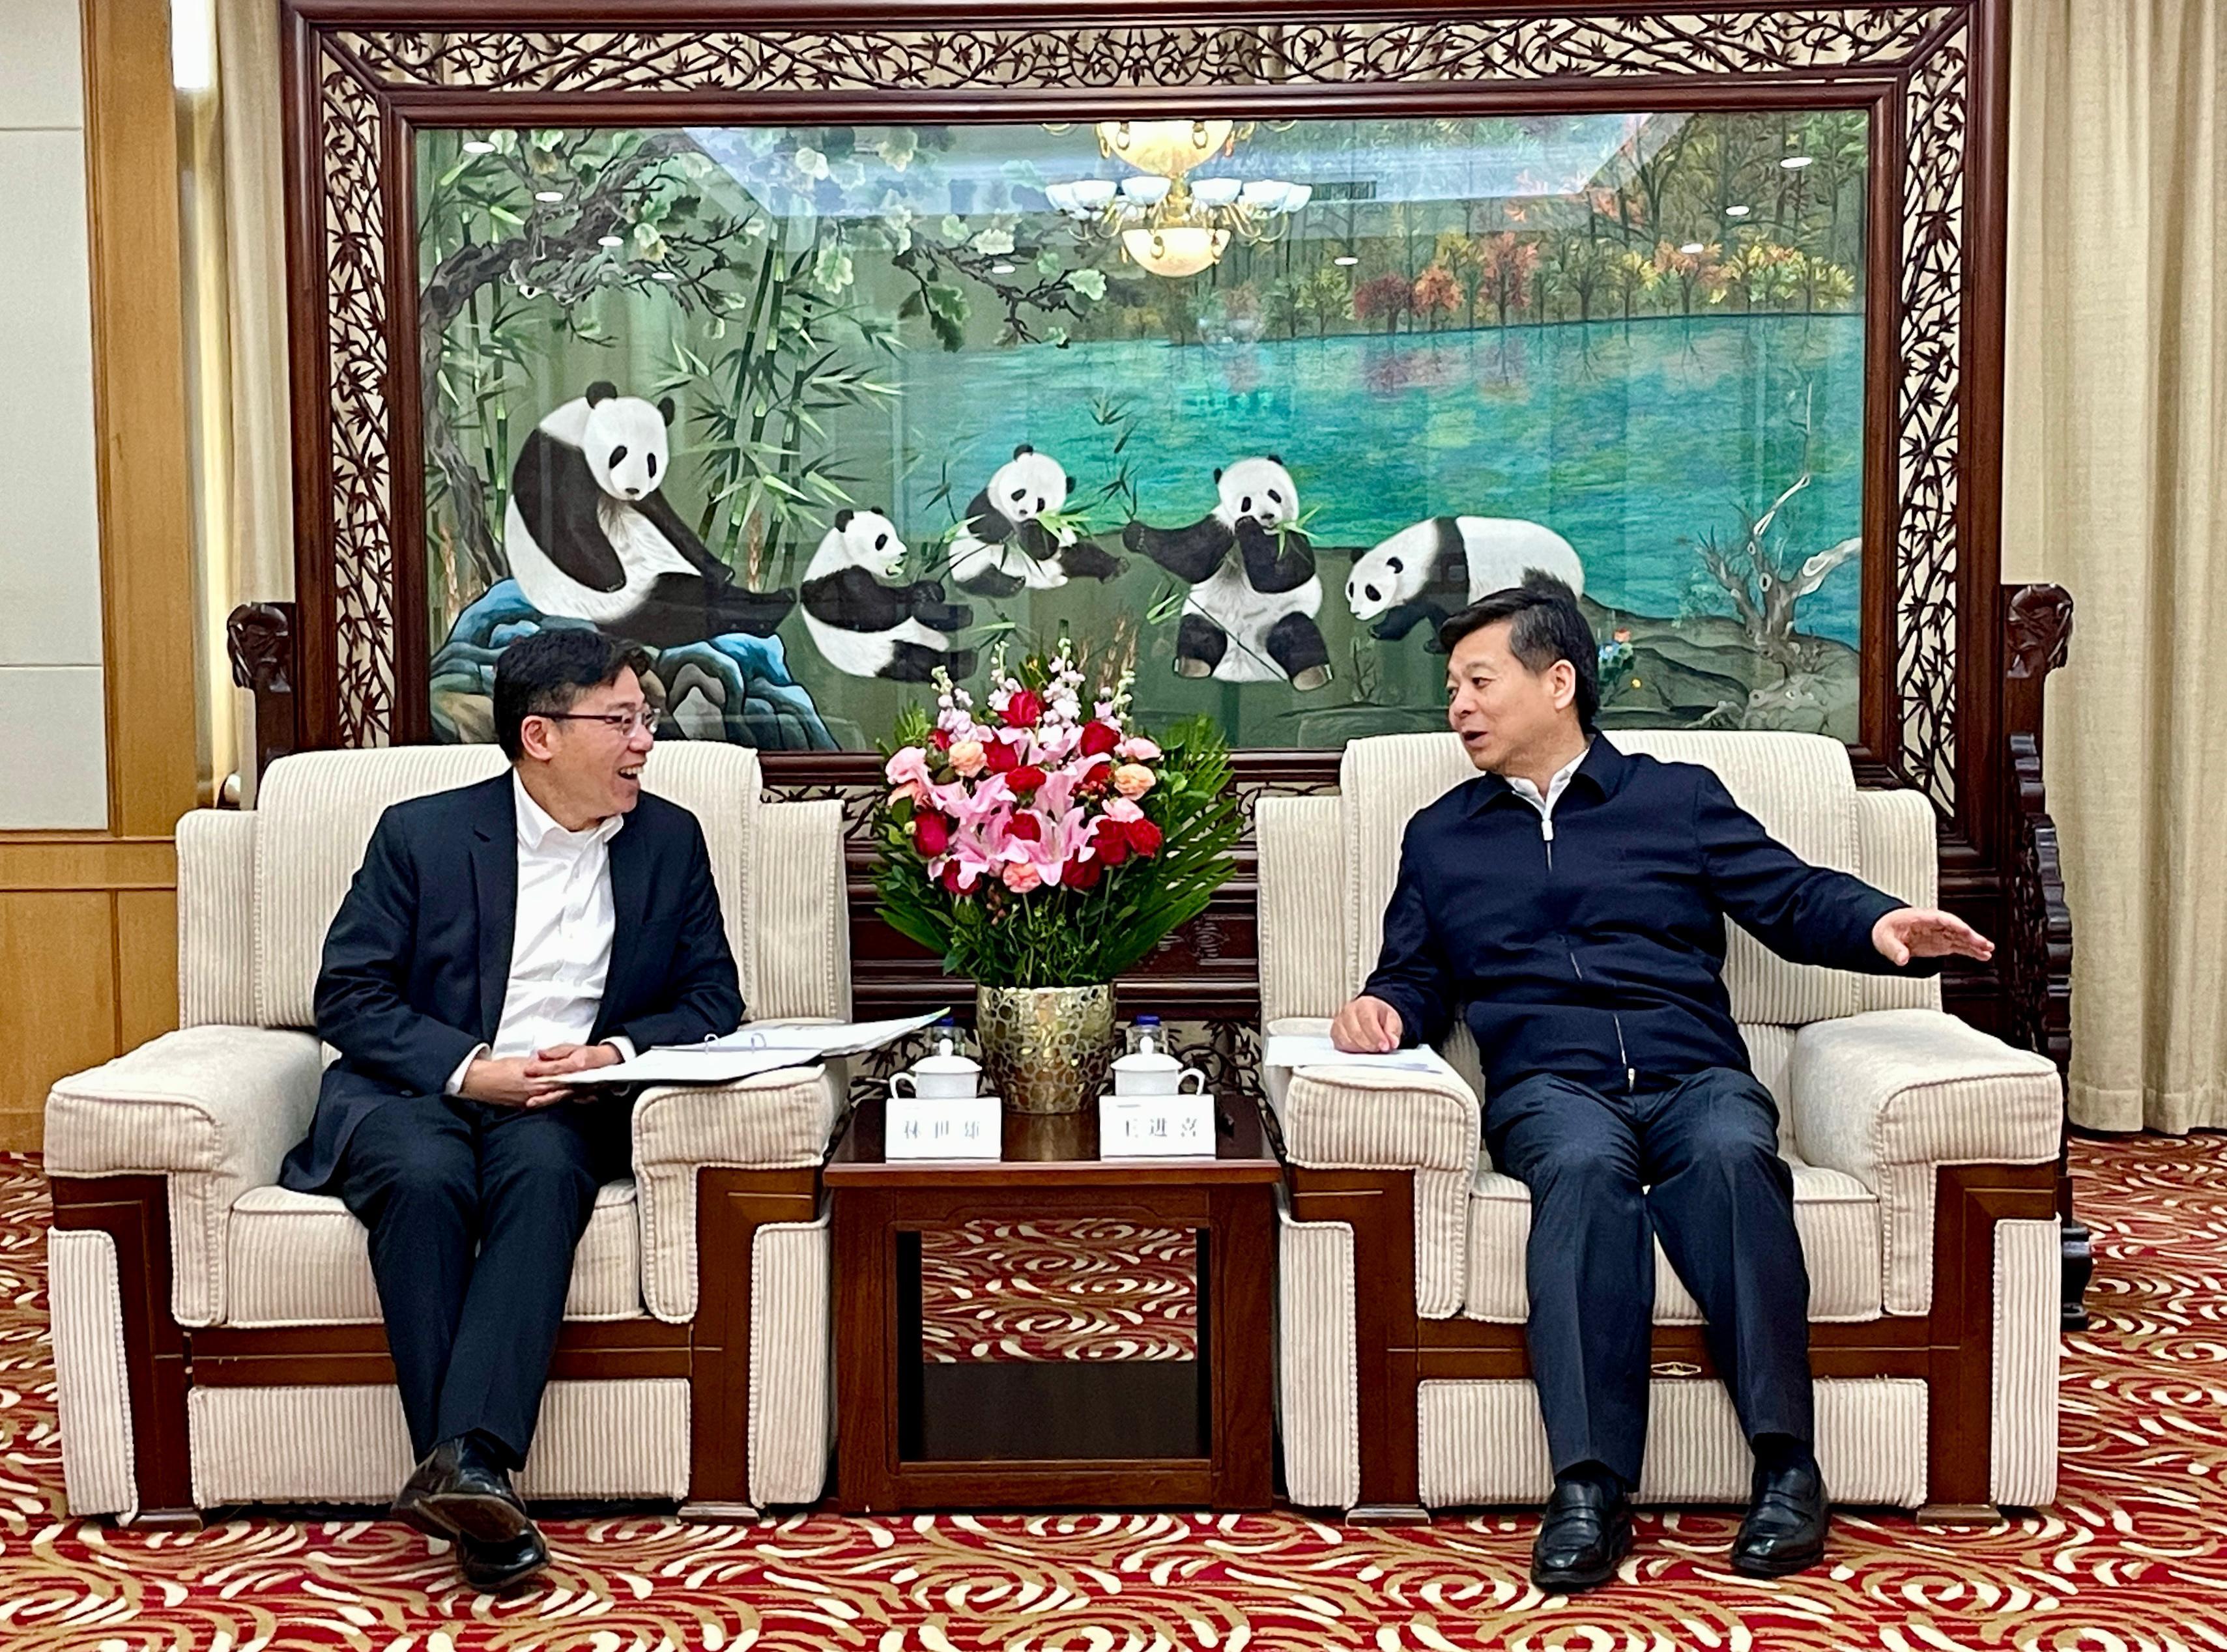 The Secretary for Transport and Logistics, Mr Lam Sai-hung (left), meets with Vice General Manager of China State Railway Group Co., Ltd Mr Wang Jinxi (right) today (April 10), discussing issues of mutual interest.